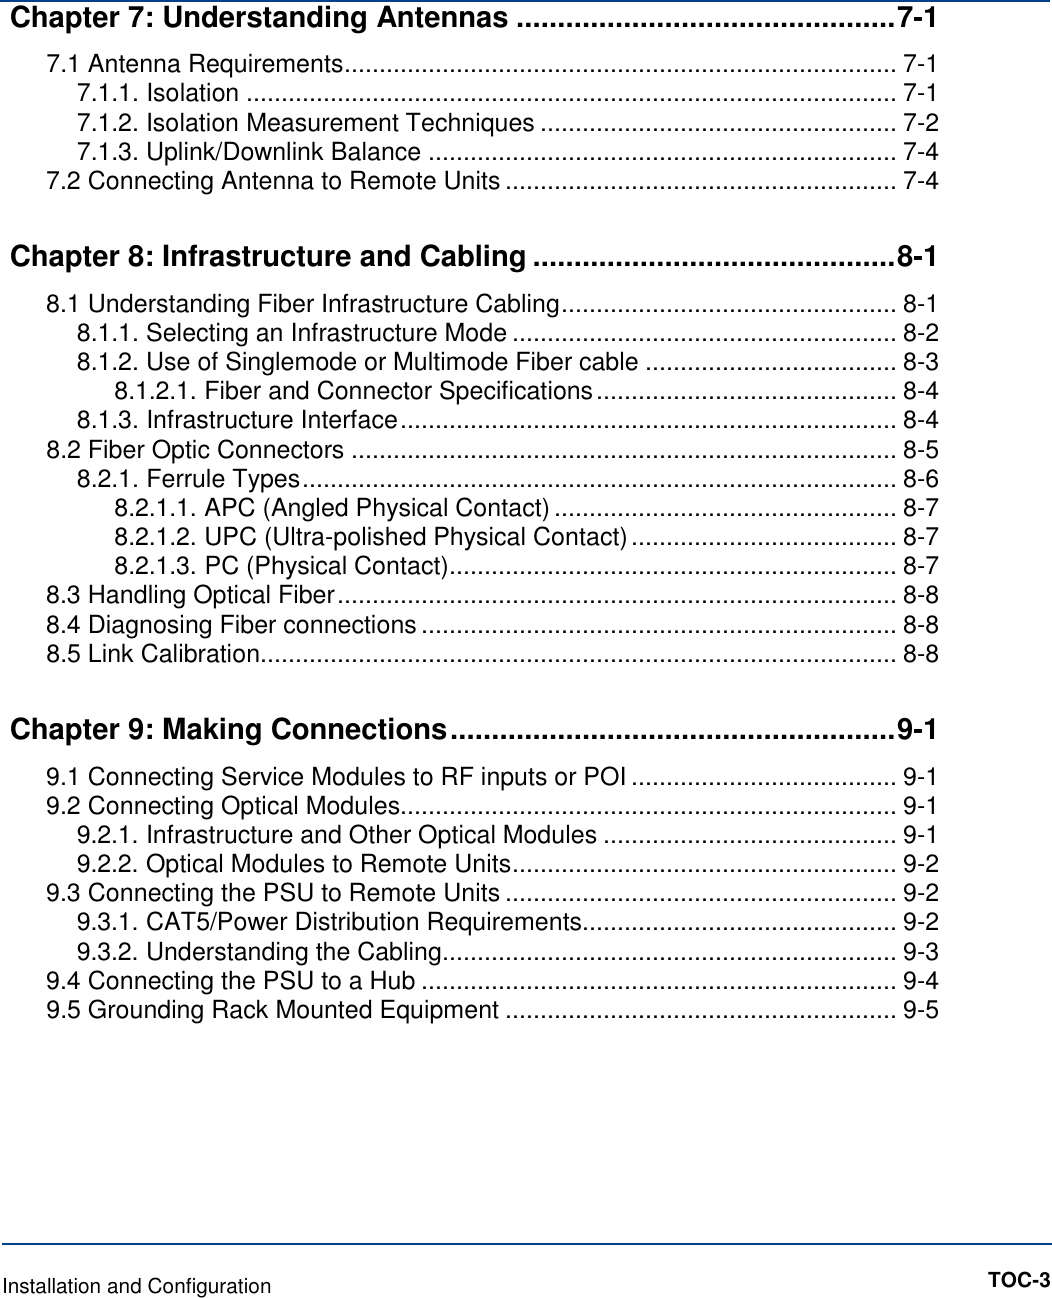 Chapter 7: Understanding Antennas .............................................. 7-1 7.1 Antenna Requirements ............................................................................... 7-1 7.1.1. Isolation ............................................................................................. 7-1 7.1.2. Isolation Measurement Techniques ................................................... 7-2 7.1.3. Uplink/Downlink Balance ................................................................... 7-4 7.2 Connecting Antenna to Remote Units ........................................................ 7-4 Chapter 8: Infrastructure and Cabling ............................................ 8-1 8.1 Understanding Fiber Infrastructure Cabling ................................................ 8-1 8.1.1. Selecting an Infrastructure Mode ....................................................... 8-2 8.1.2. Use of Singlemode or Multimode Fiber cable .................................... 8-3 8.1.2.1. Fiber and Connector Specifications ........................................... 8-4 8.1.3. Infrastructure Interface ....................................................................... 8-4 8.2 Fiber Optic Connectors .............................................................................. 8-5 8.2.1. Ferrule Types ..................................................................................... 8-6 8.2.1.1. APC (Angled Physical Contact) ................................................. 8-7 8.2.1.2. UPC (Ultra-polished Physical Contact) ...................................... 8-7 8.2.1.3. PC (Physical Contact) ................................................................ 8-7 8.3 Handling Optical Fiber ................................................................................ 8-8 8.4 Diagnosing Fiber connections .................................................................... 8-8 8.5 Link Calibration........................................................................................... 8-8 Chapter 9: Making Connections ...................................................... 9-1 9.1 Connecting Service Modules to RF inputs or POI ...................................... 9-1 9.2 Connecting Optical Modules....................................................................... 9-1 9.2.1. Infrastructure and Other Optical Modules .......................................... 9-1 9.2.2. Optical Modules to Remote Units ....................................................... 9-2 9.3 Connecting the PSU to Remote Units ........................................................ 9-2 9.3.1. CAT5/Power Distribution Requirements............................................. 9-2 9.3.2. Understanding the Cabling ................................................................. 9-3 9.4 Connecting the PSU to a Hub .................................................................... 9-4 9.5 Grounding Rack Mounted Equipment ........................................................ 9-5          Installation and Configuration          TOC-3 